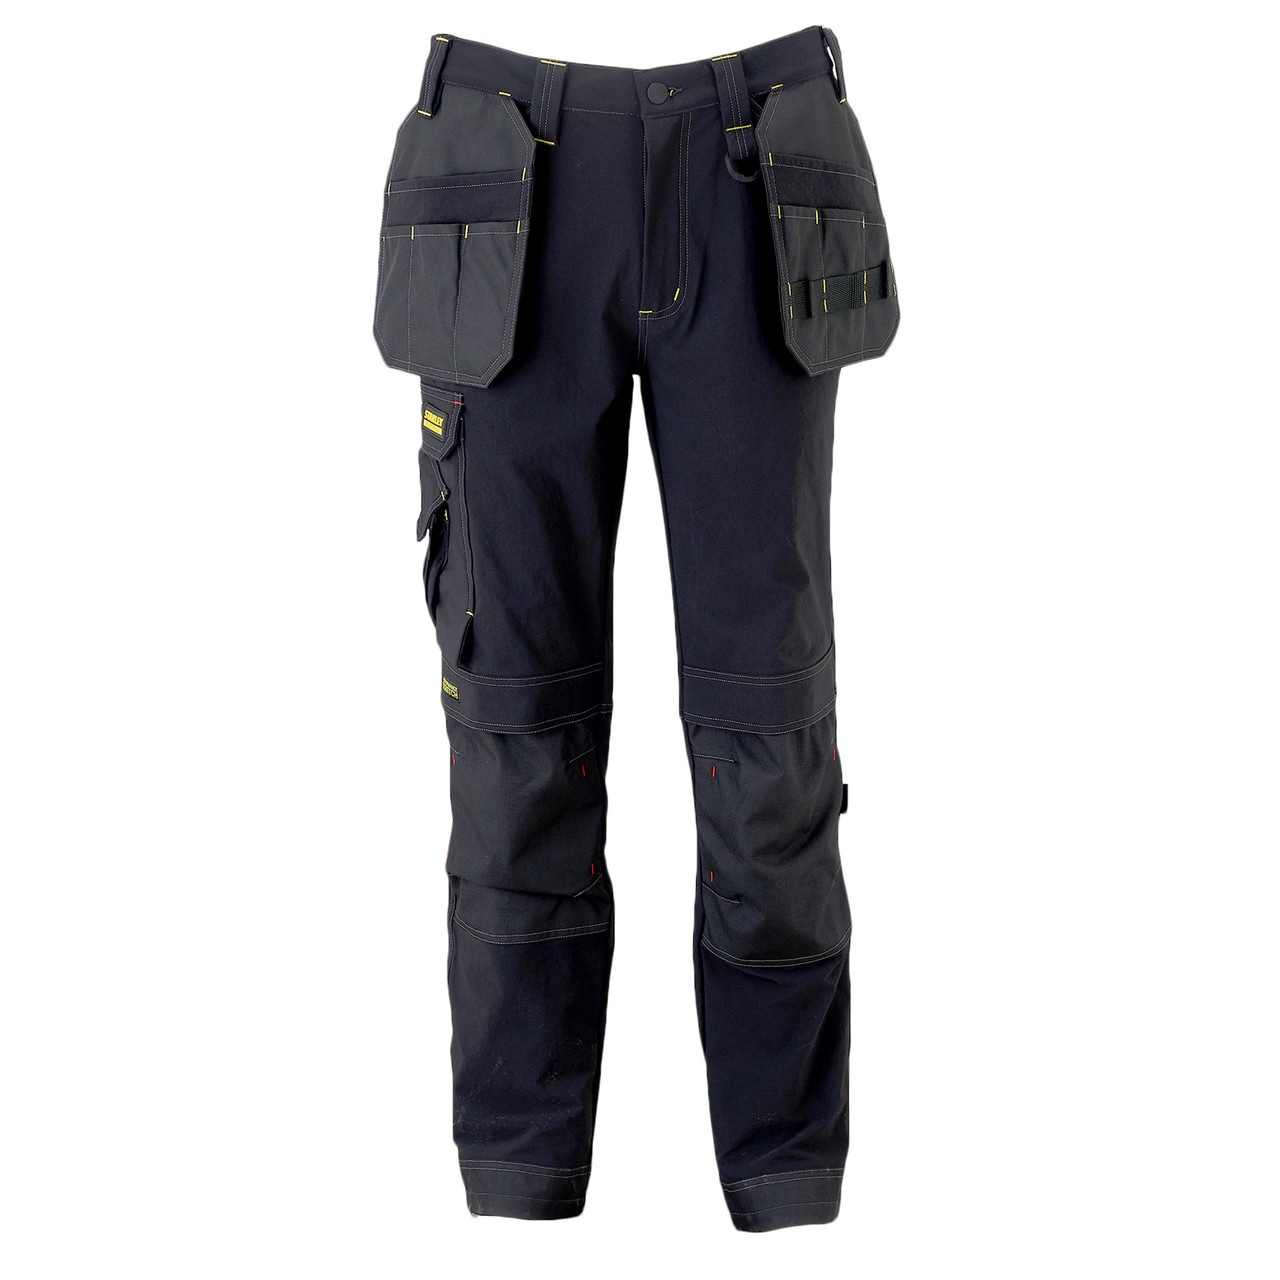 OX Workwear Ripstop Trousers - Size 30 to 38 waist